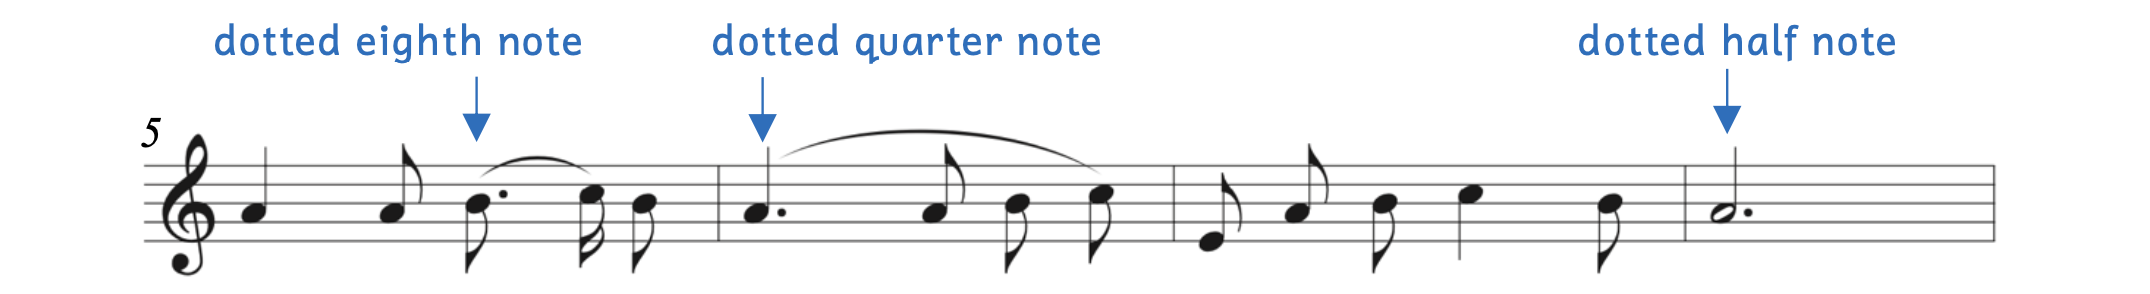 Dotted notes in a real music example. There is a dotted eighth note, dotted quarter note, and dotted half note.